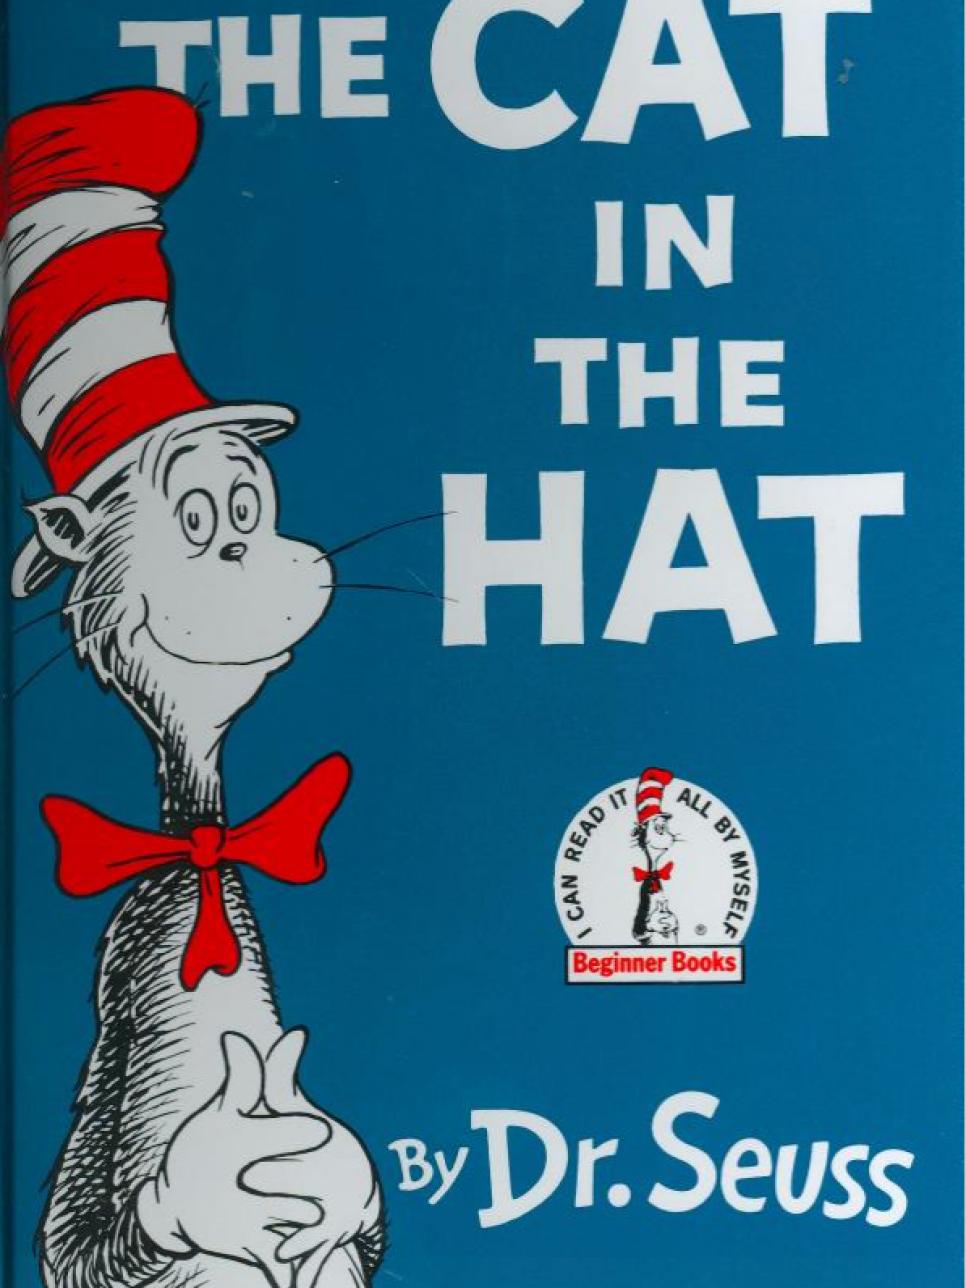 The-Cat-In-The-Hat.jpg